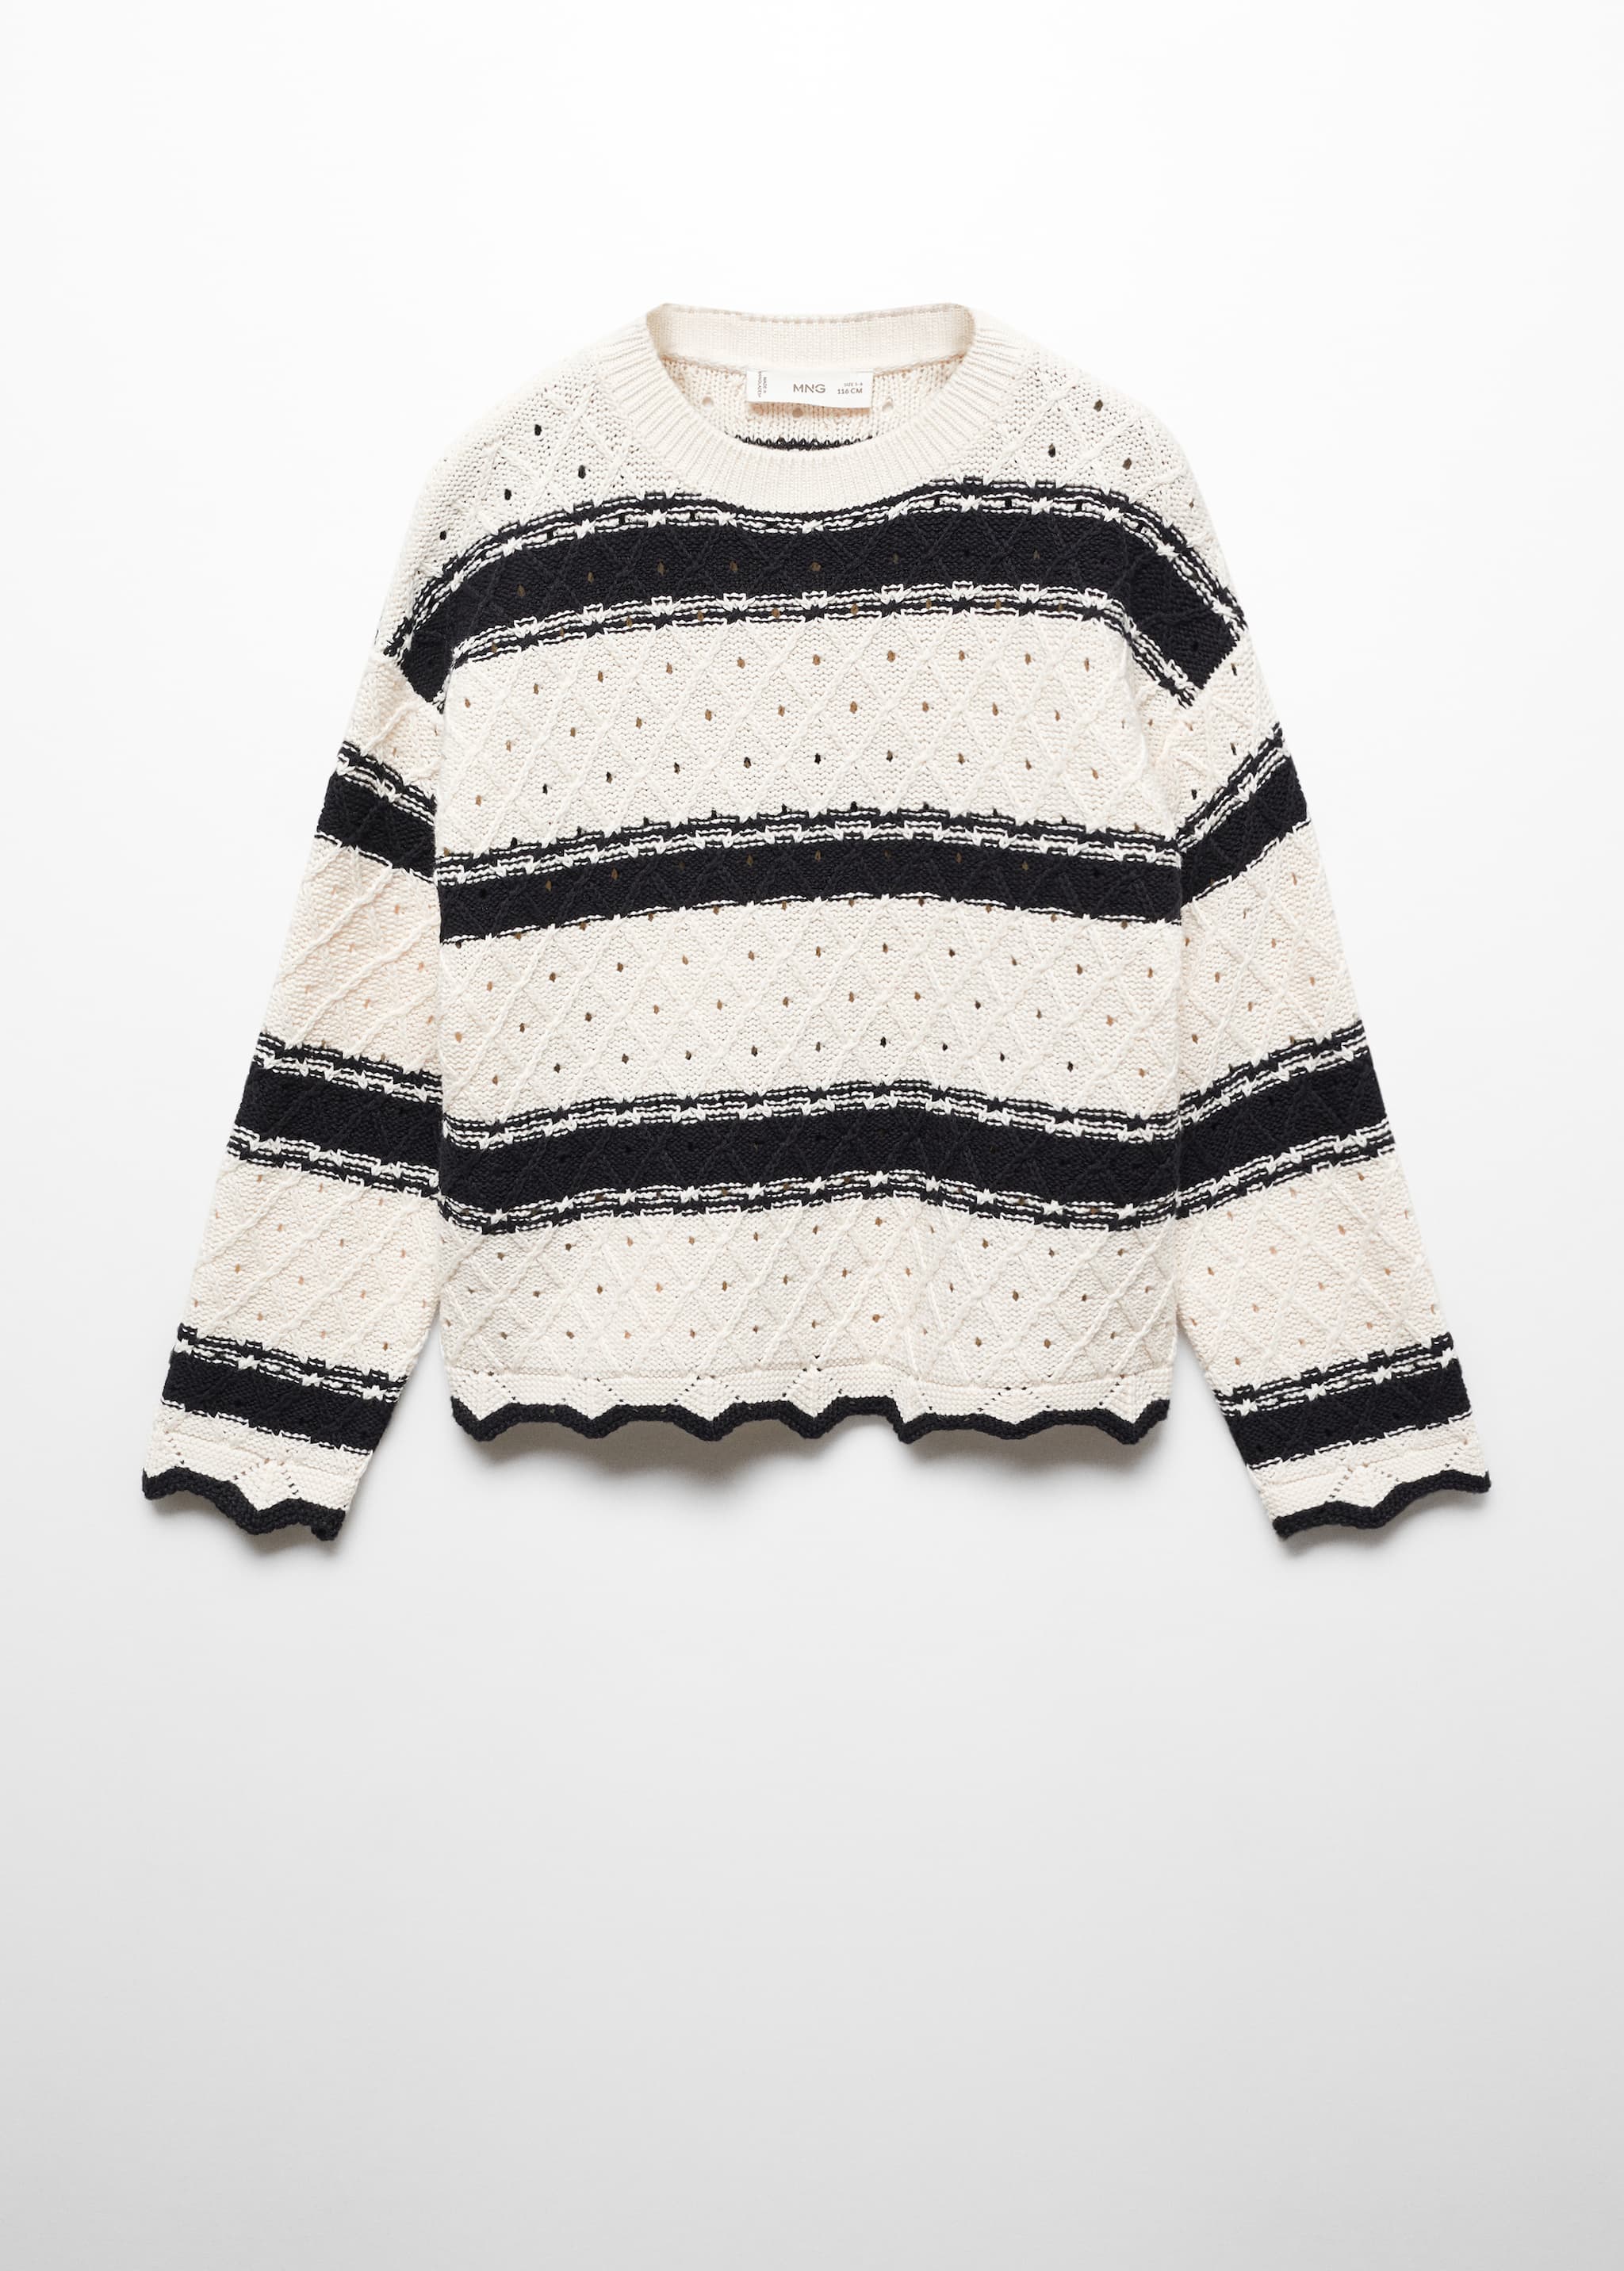 Striped openwork knit sweater - Article without model